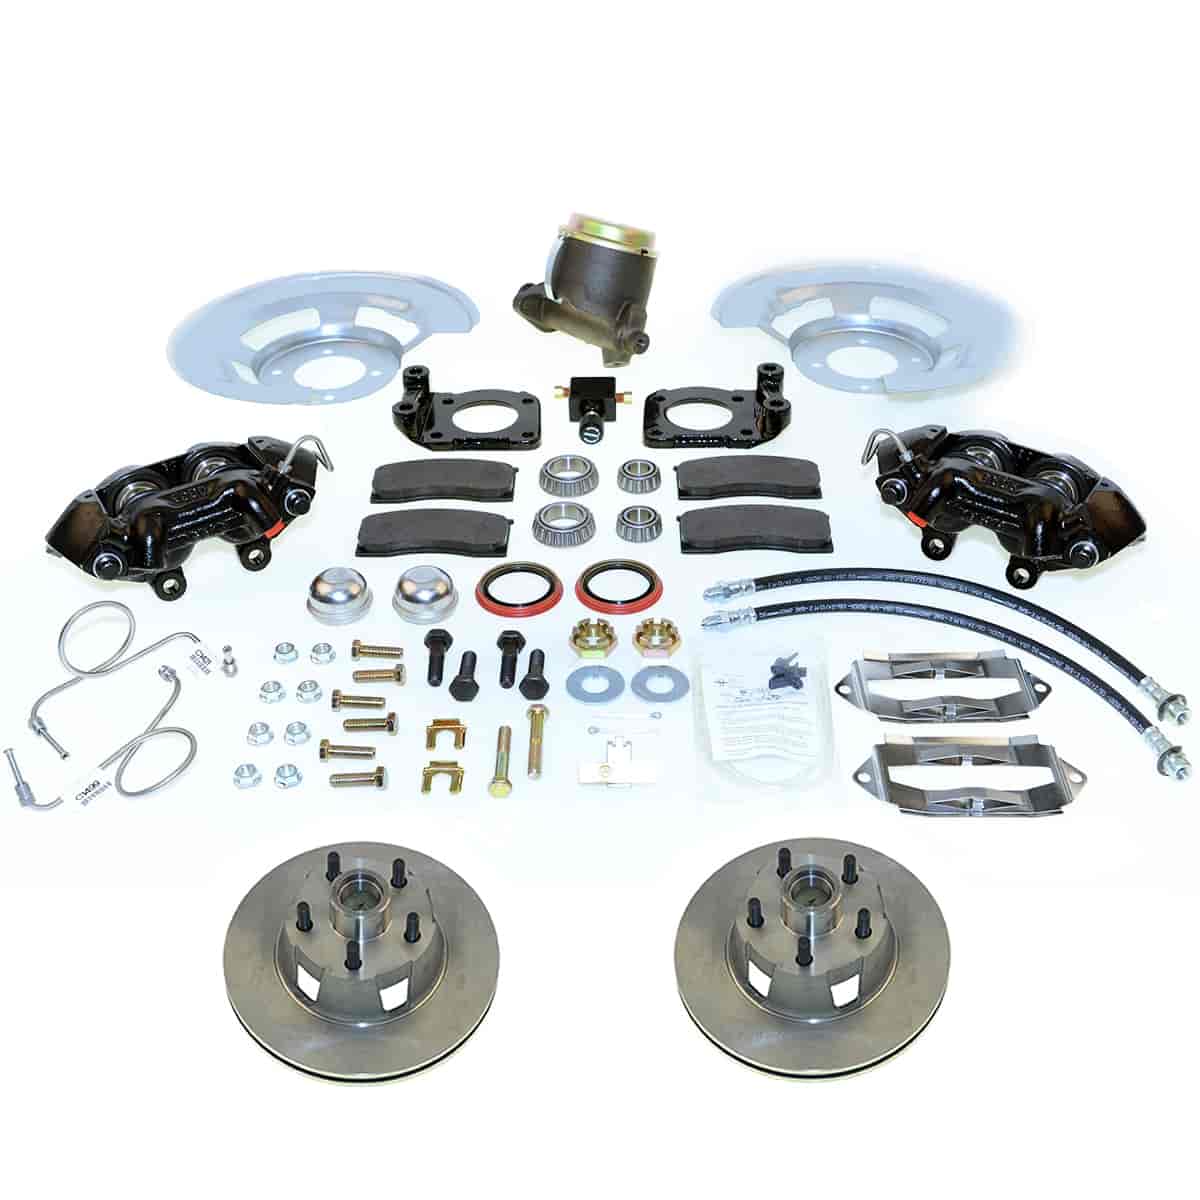 Front 4-Piston Drum to Disc Brake Conversion Kit See More Details for Applications